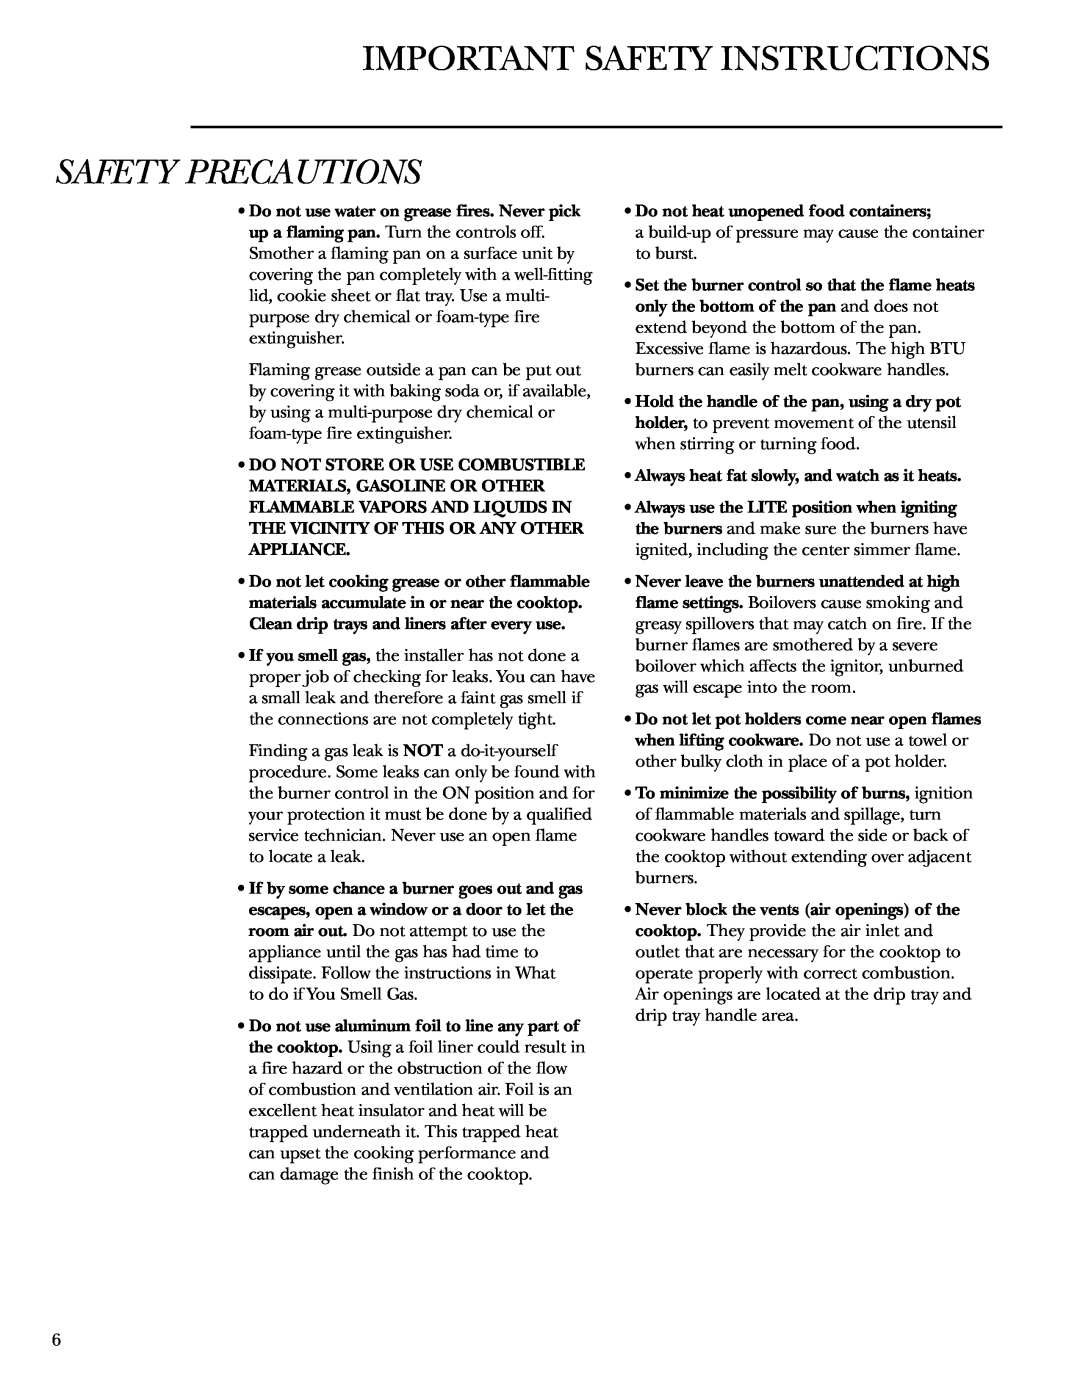 GE 36 owner manual Important Safety Instructions, Safety Precautions, Do not heat unopened food containers 